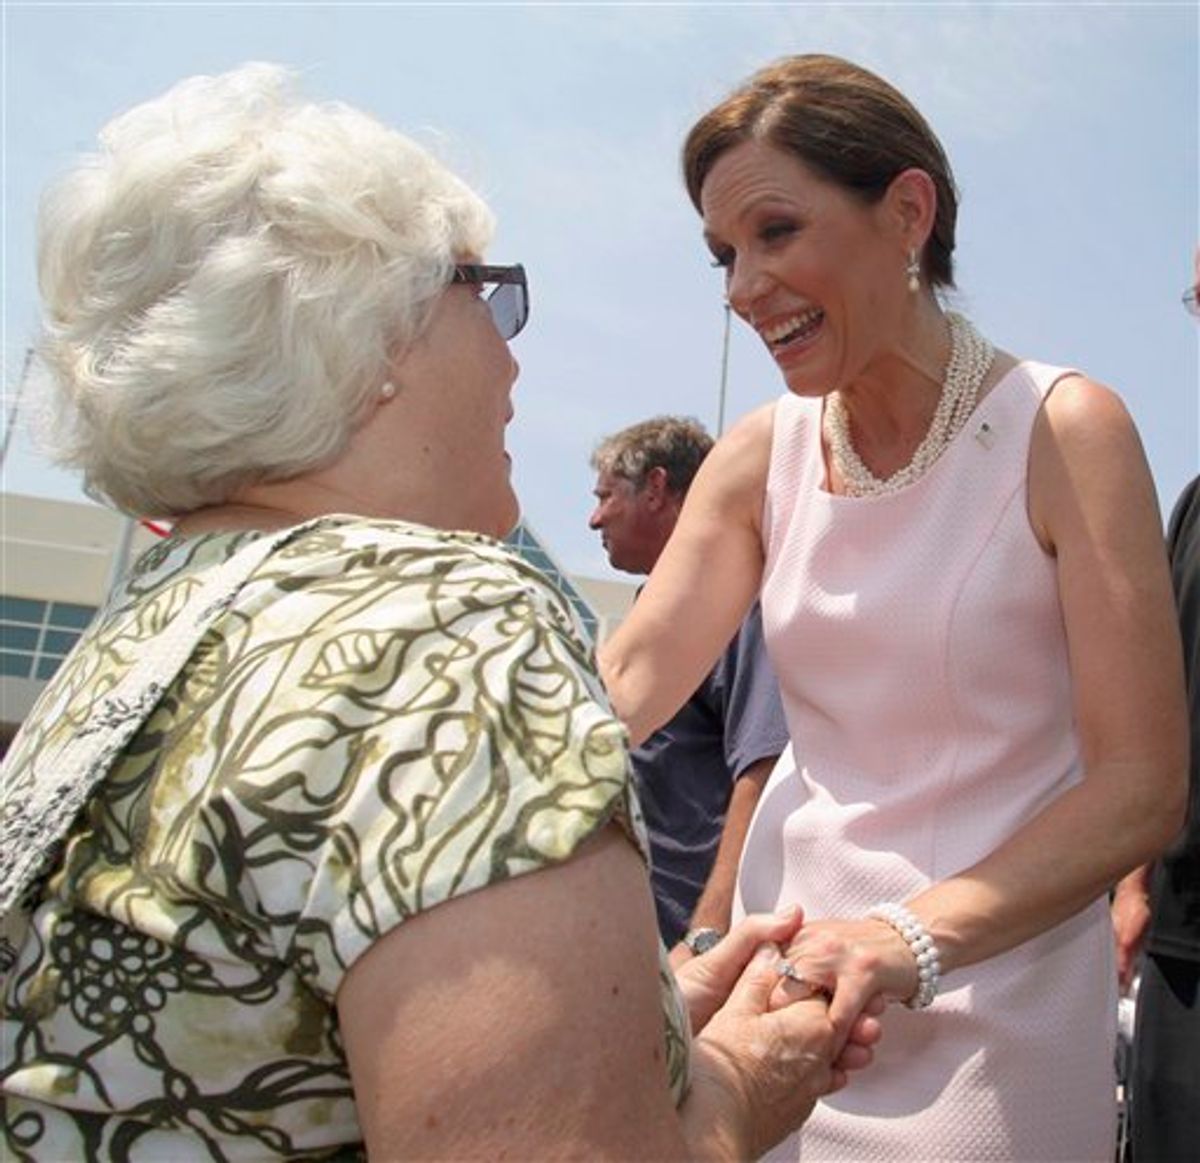 Republican presidential candidate, Rep. Michele Bachmann, R-Minn. greats a supporter outside the Myrtle Beach Convention Center  in Myrtle Beach, S.C., Friday, August 19, 2011. (AP Photo/Willis Glassgow) (AP)